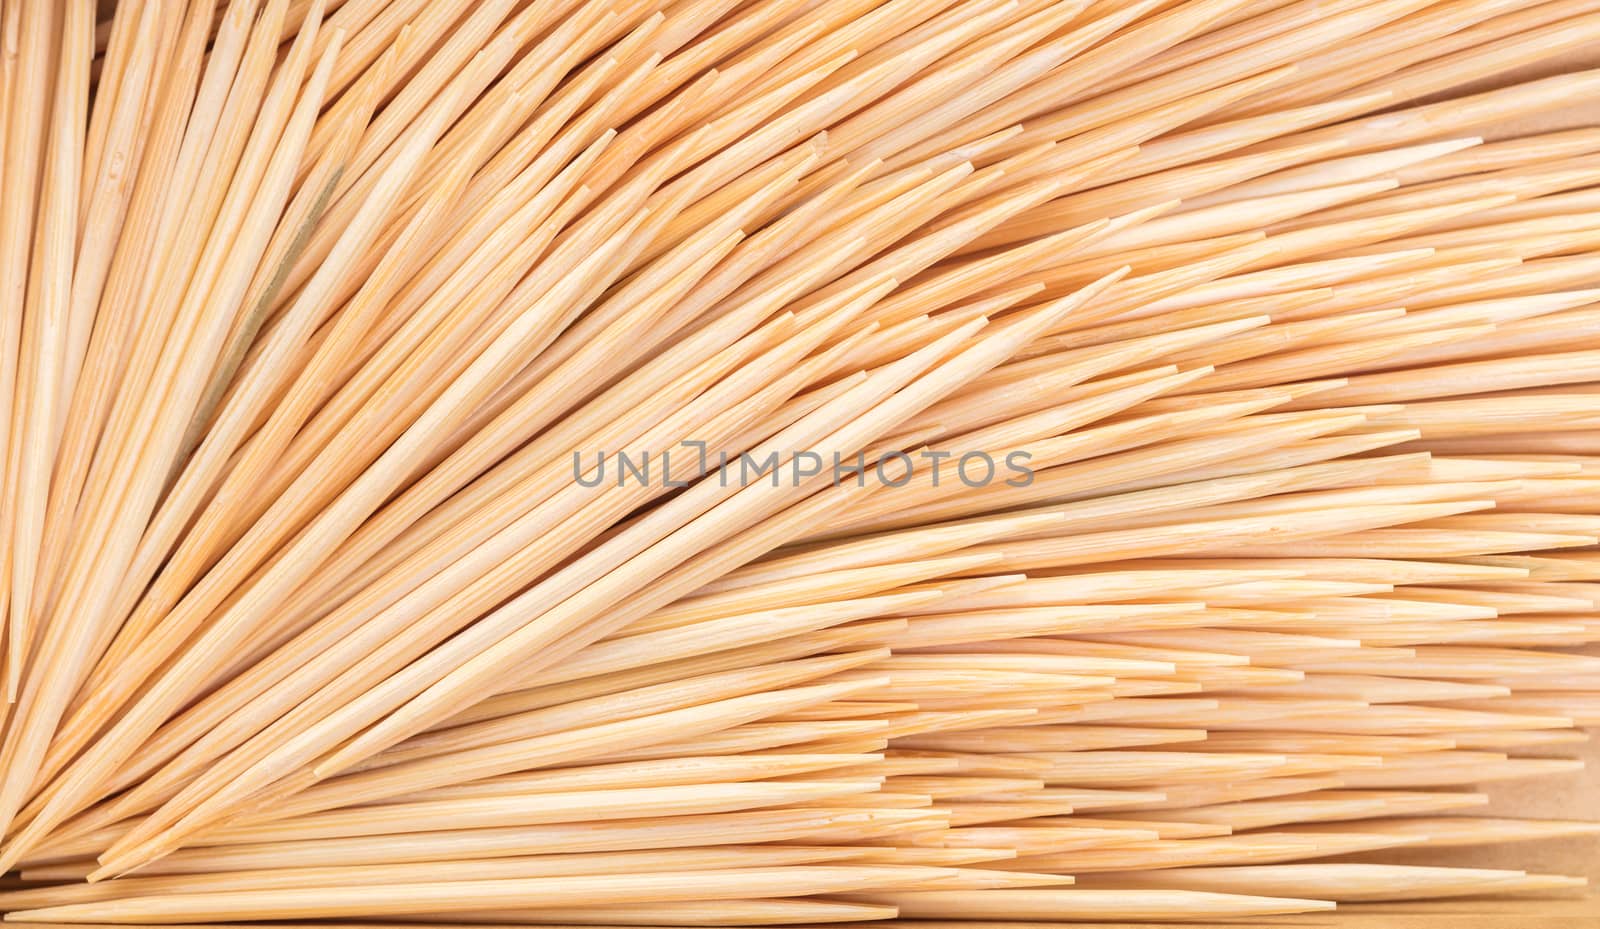 abstract background of wooden toothpicks close-up